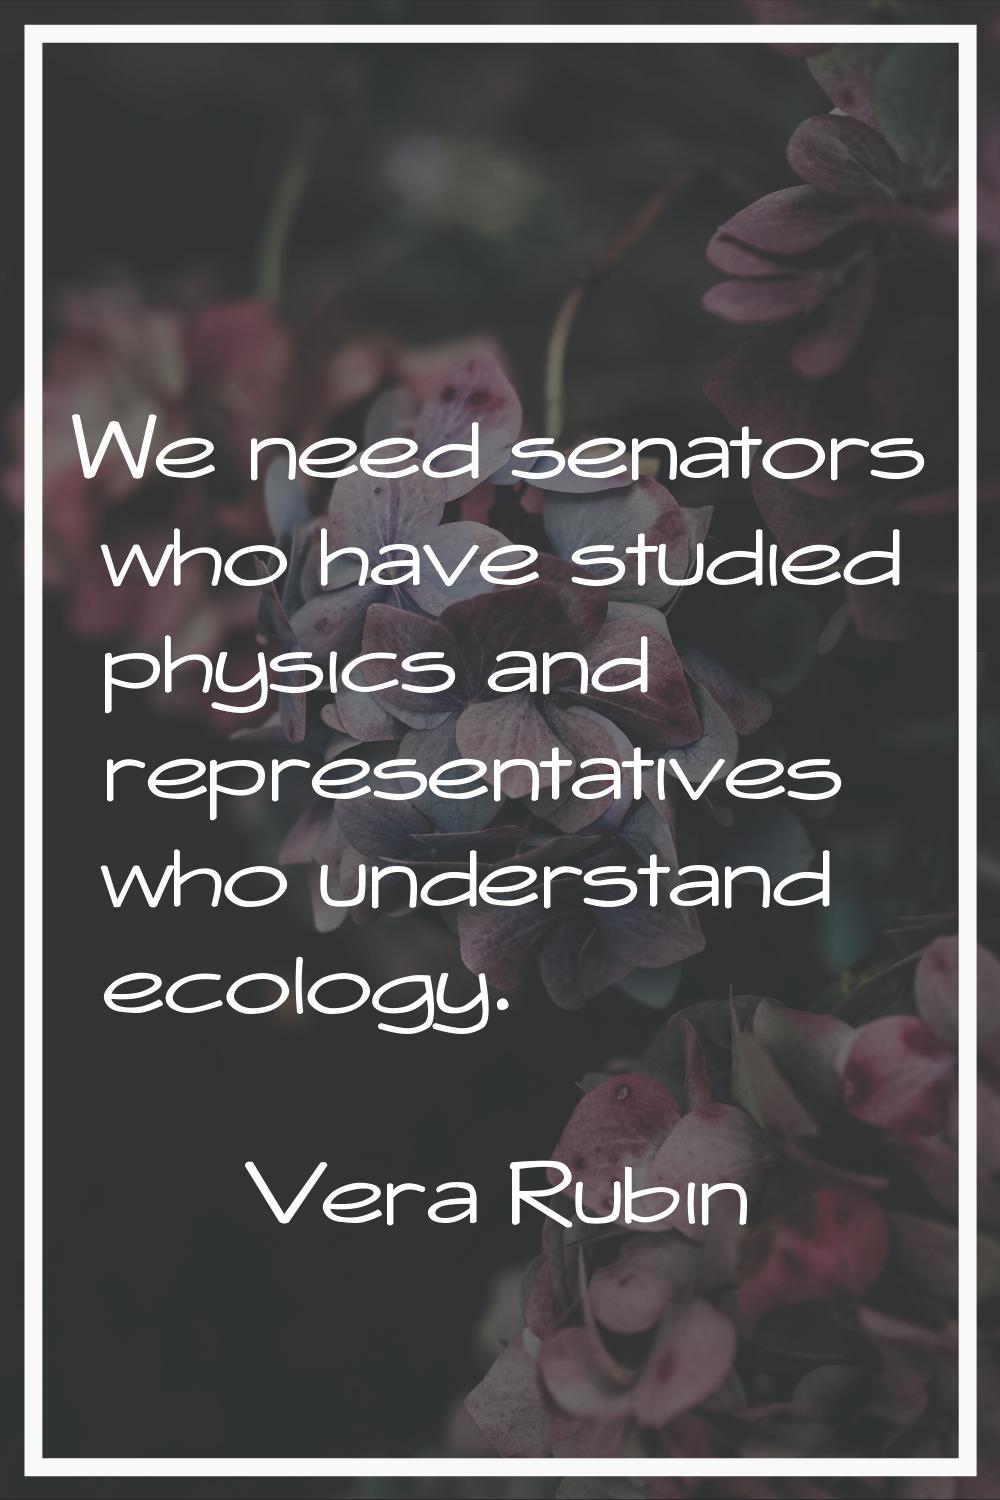 We need senators who have studied physics and representatives who understand ecology.